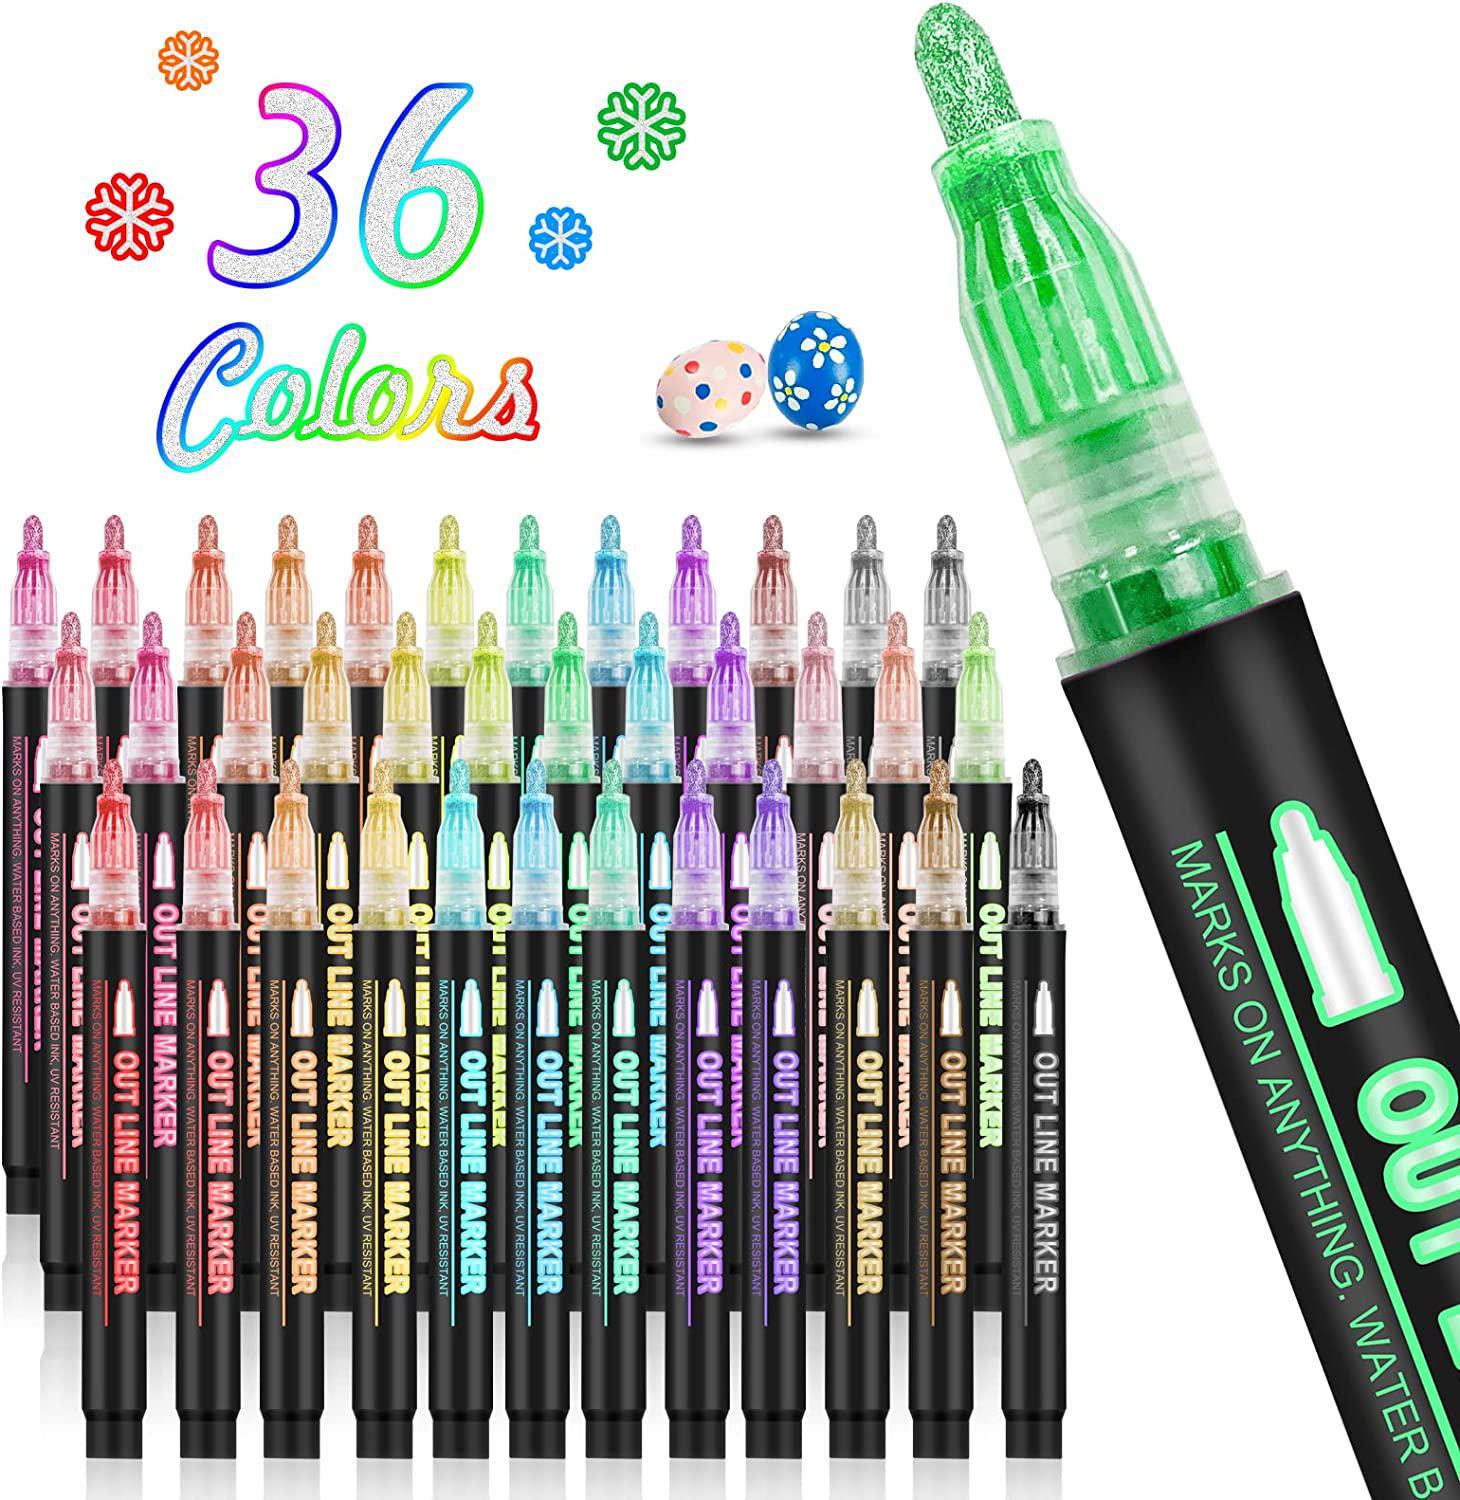 36 Pack Double Line Outline Markers, and 50 similar items